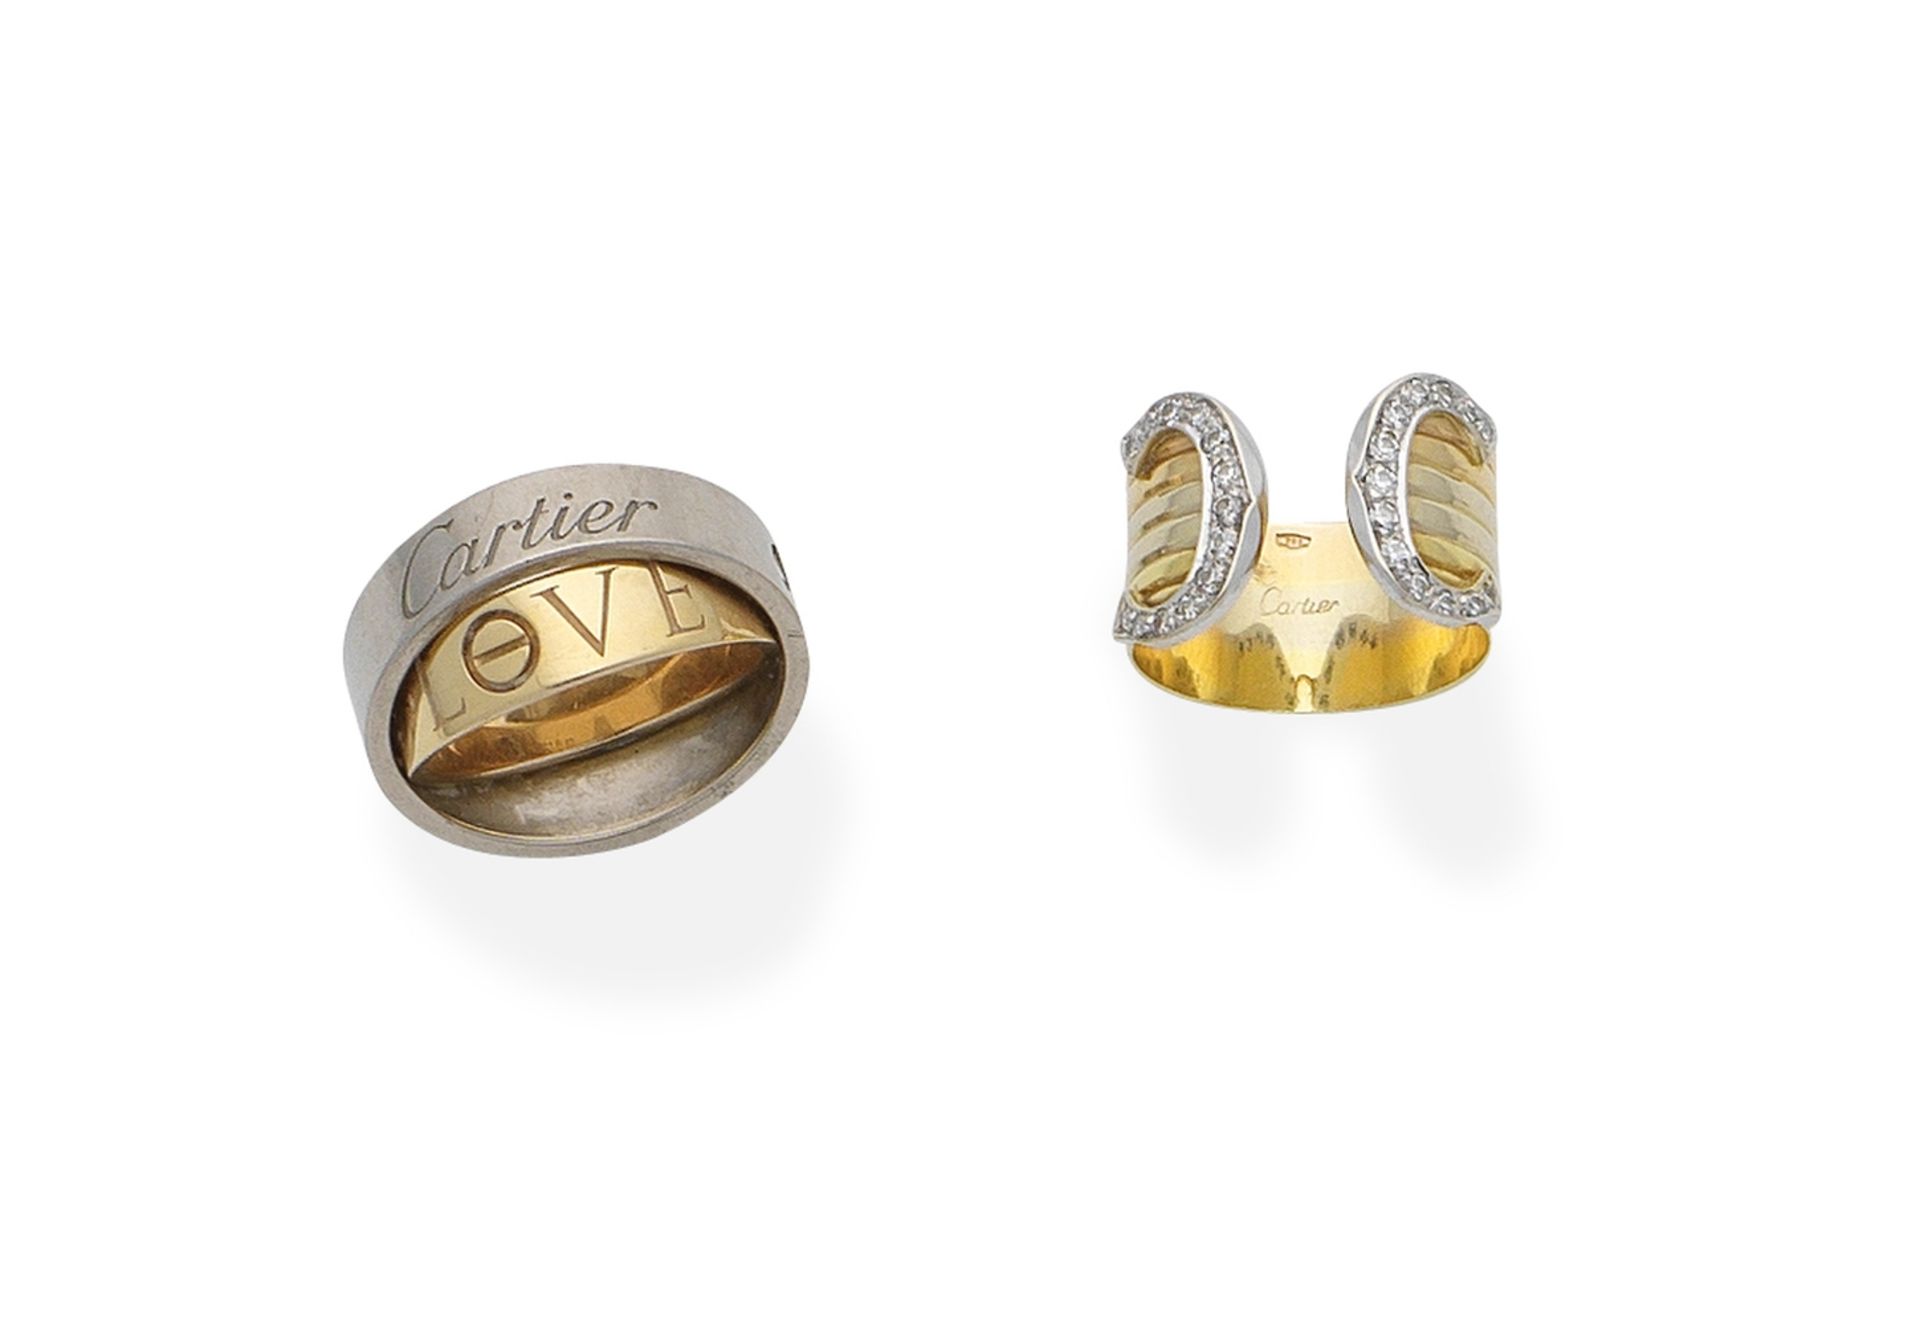 Cartier: Diamond 'Double-C' ring and 'Love' ring (2)